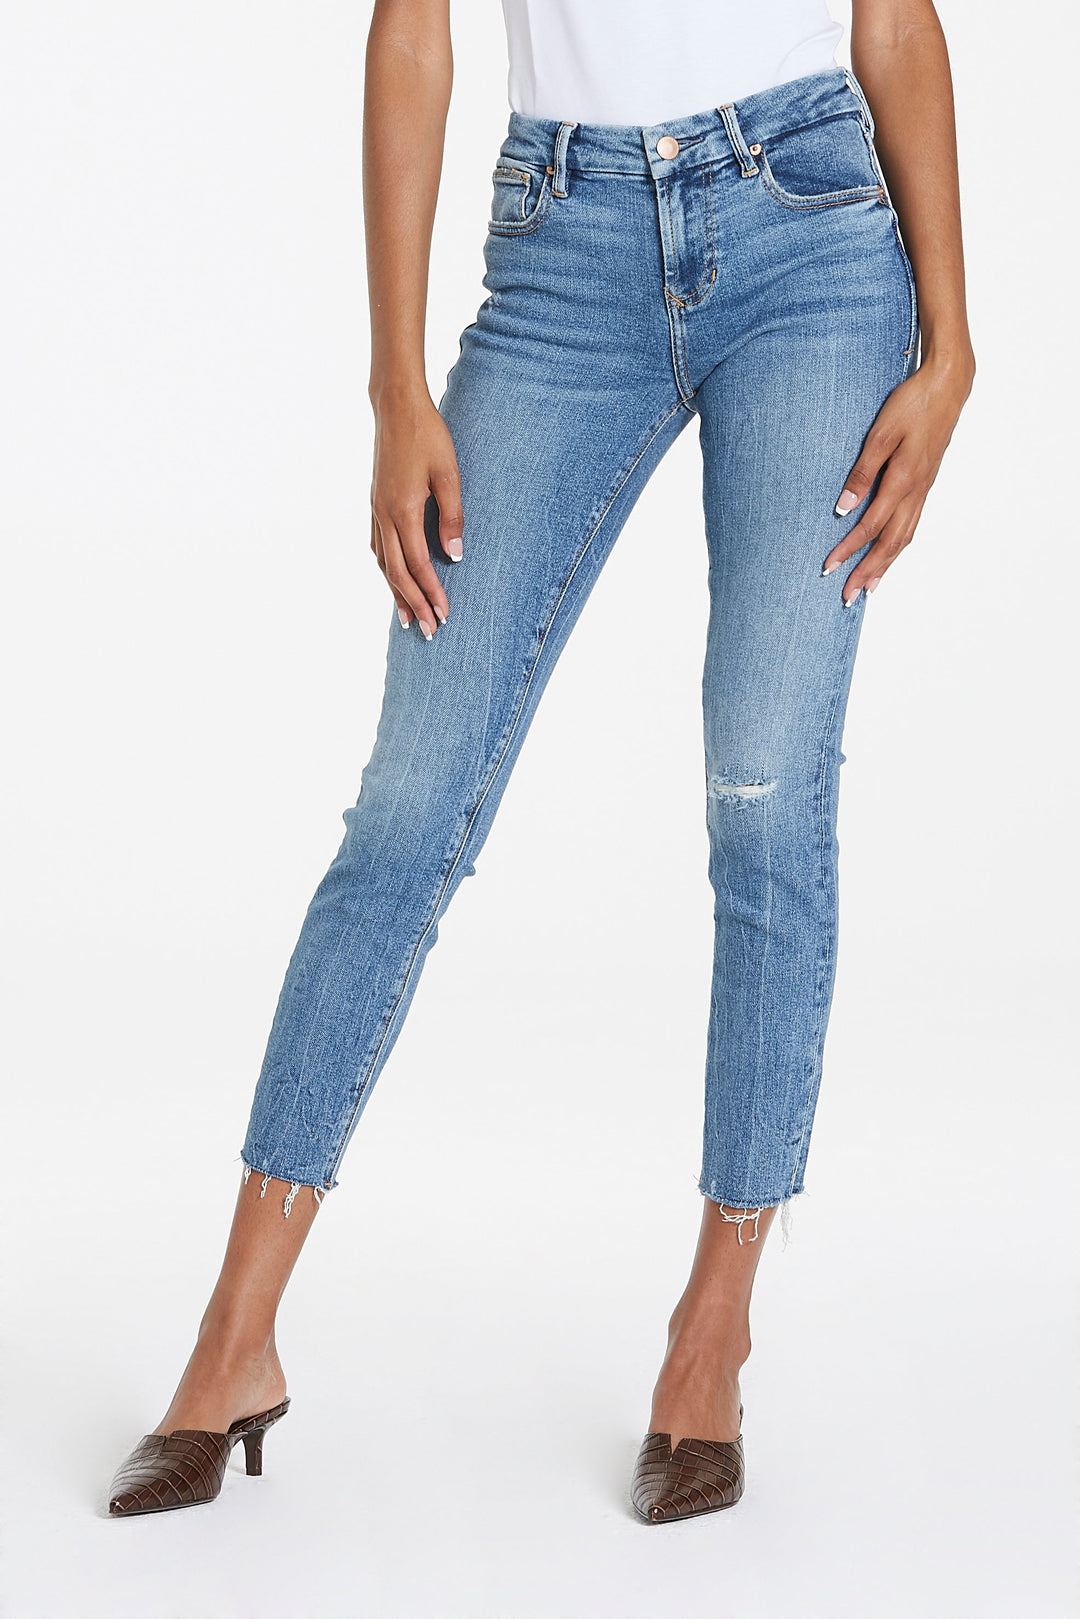 image of a female model wearing a OLIVIA SUPER HIGH RISE ANKLE SKINNY JEANS POCATELLO JEANS